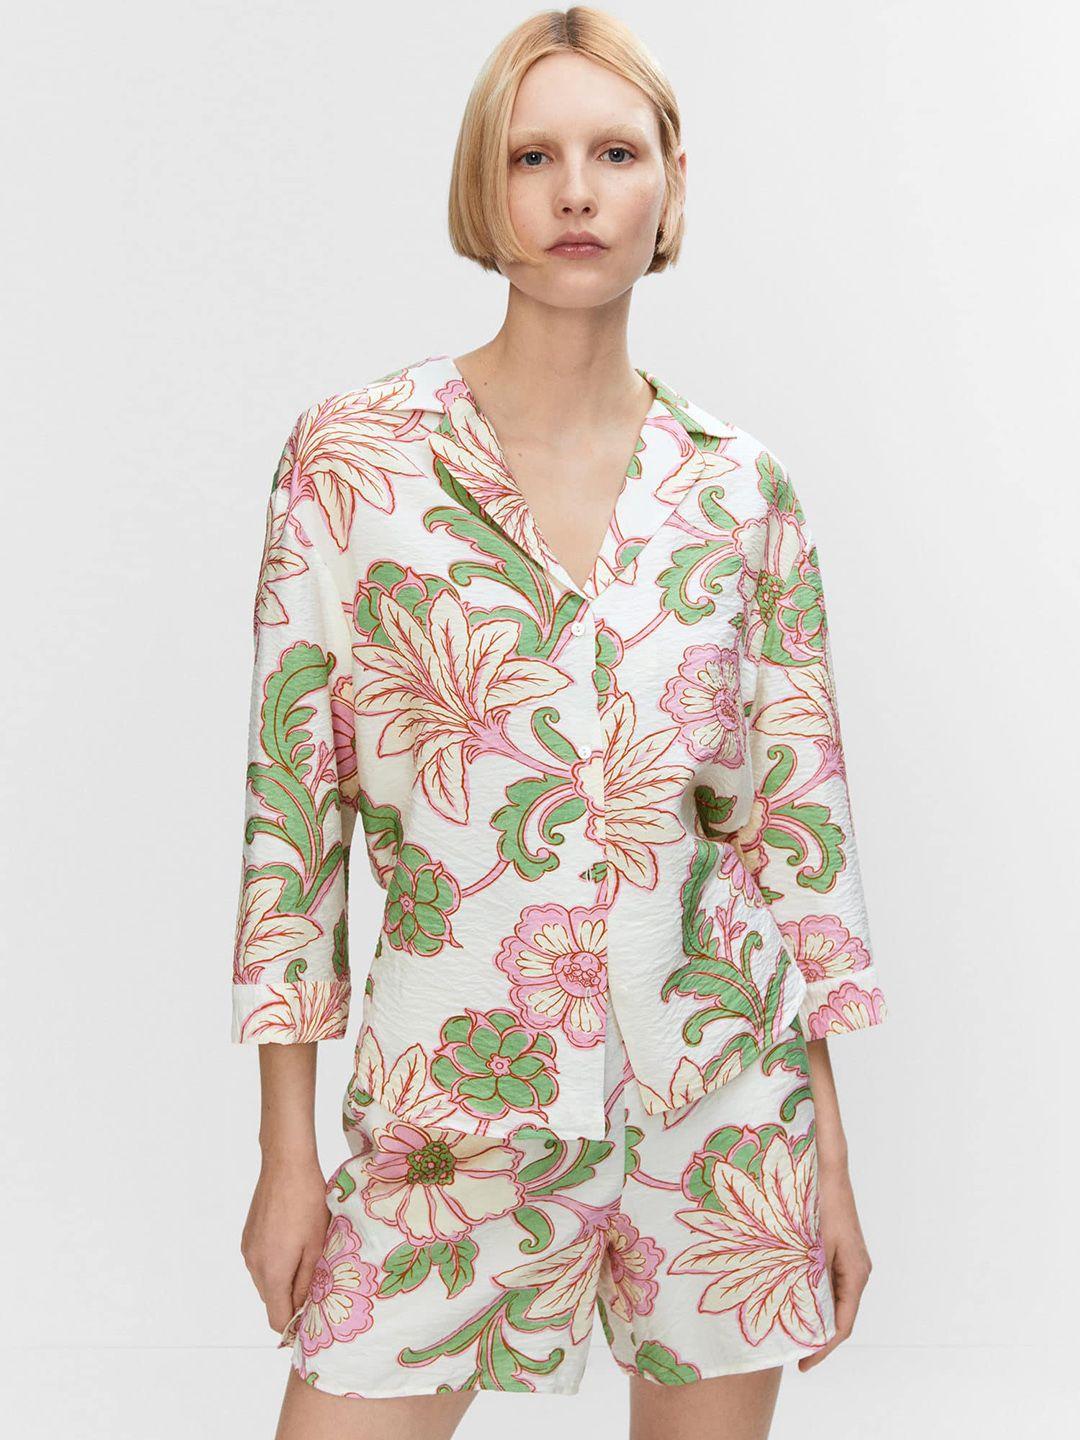 mango textured floral opaque printed casual shirt